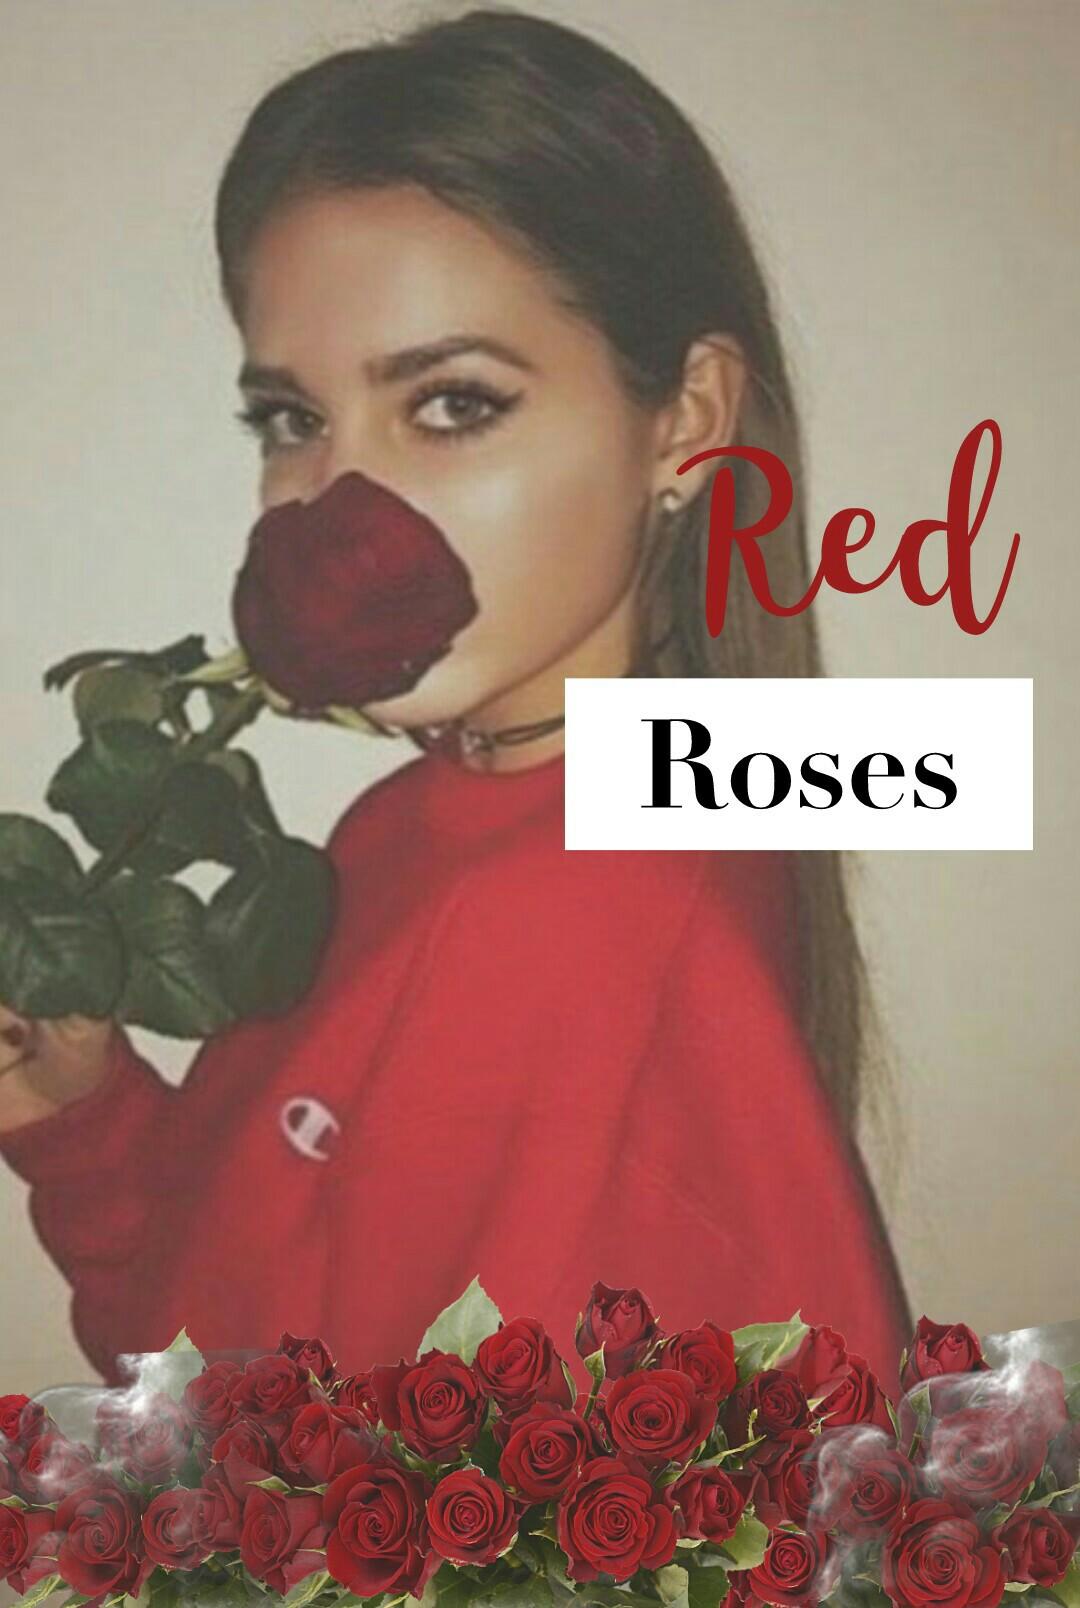 Red roses 🌹